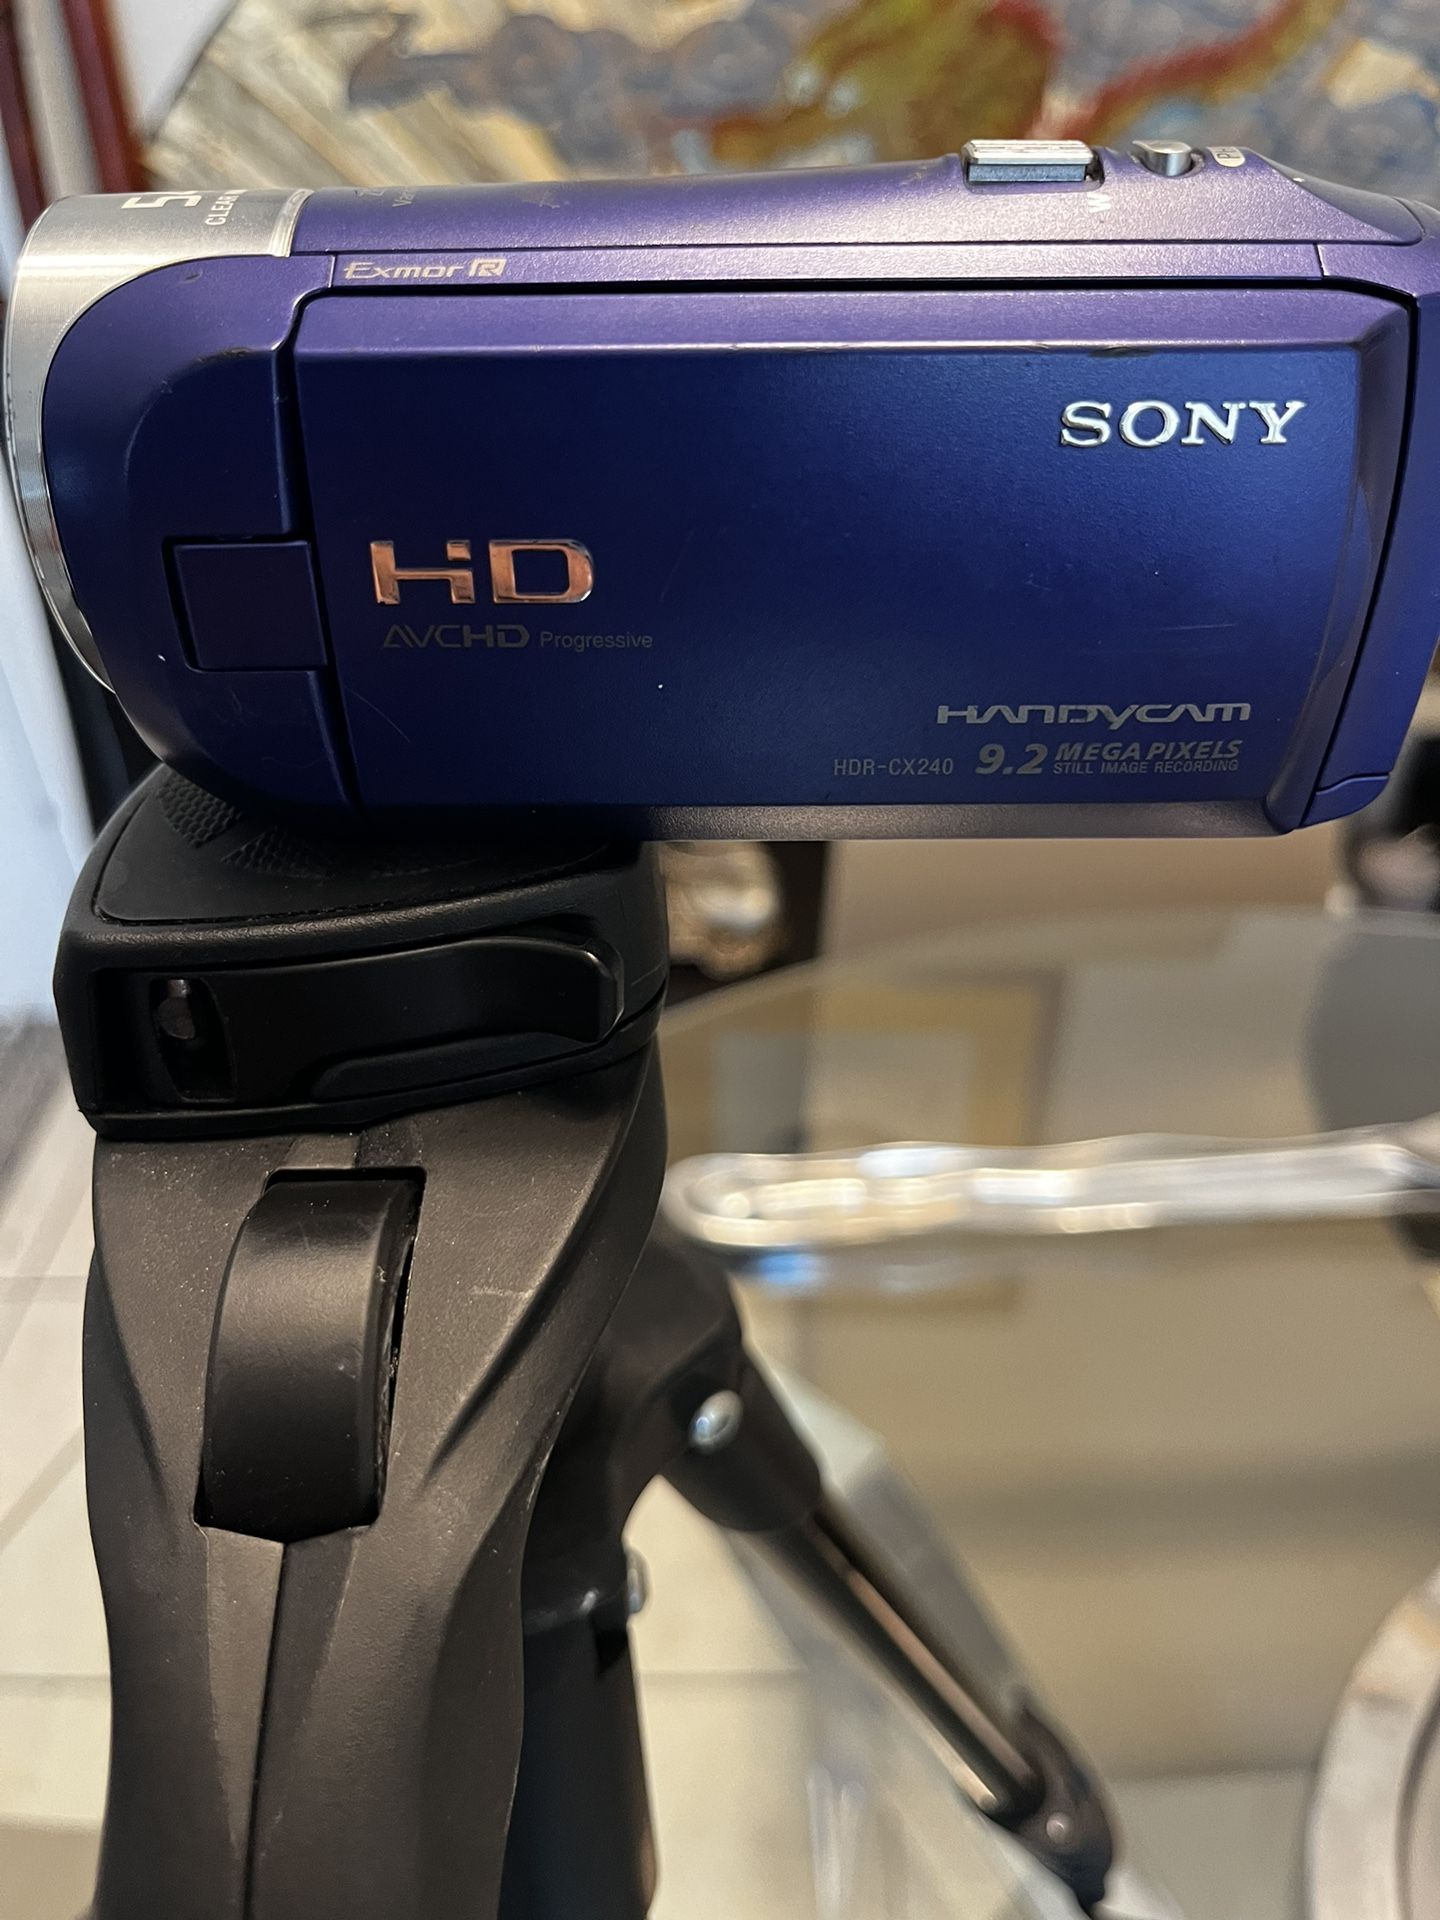 Sony Handycam HDR-CX240 w /2 SD cards 2 batteries m, And USB/Wall Plug & Manfrotto Compact Action Tripod $180  OBO/ Delivery & Shipping Available 